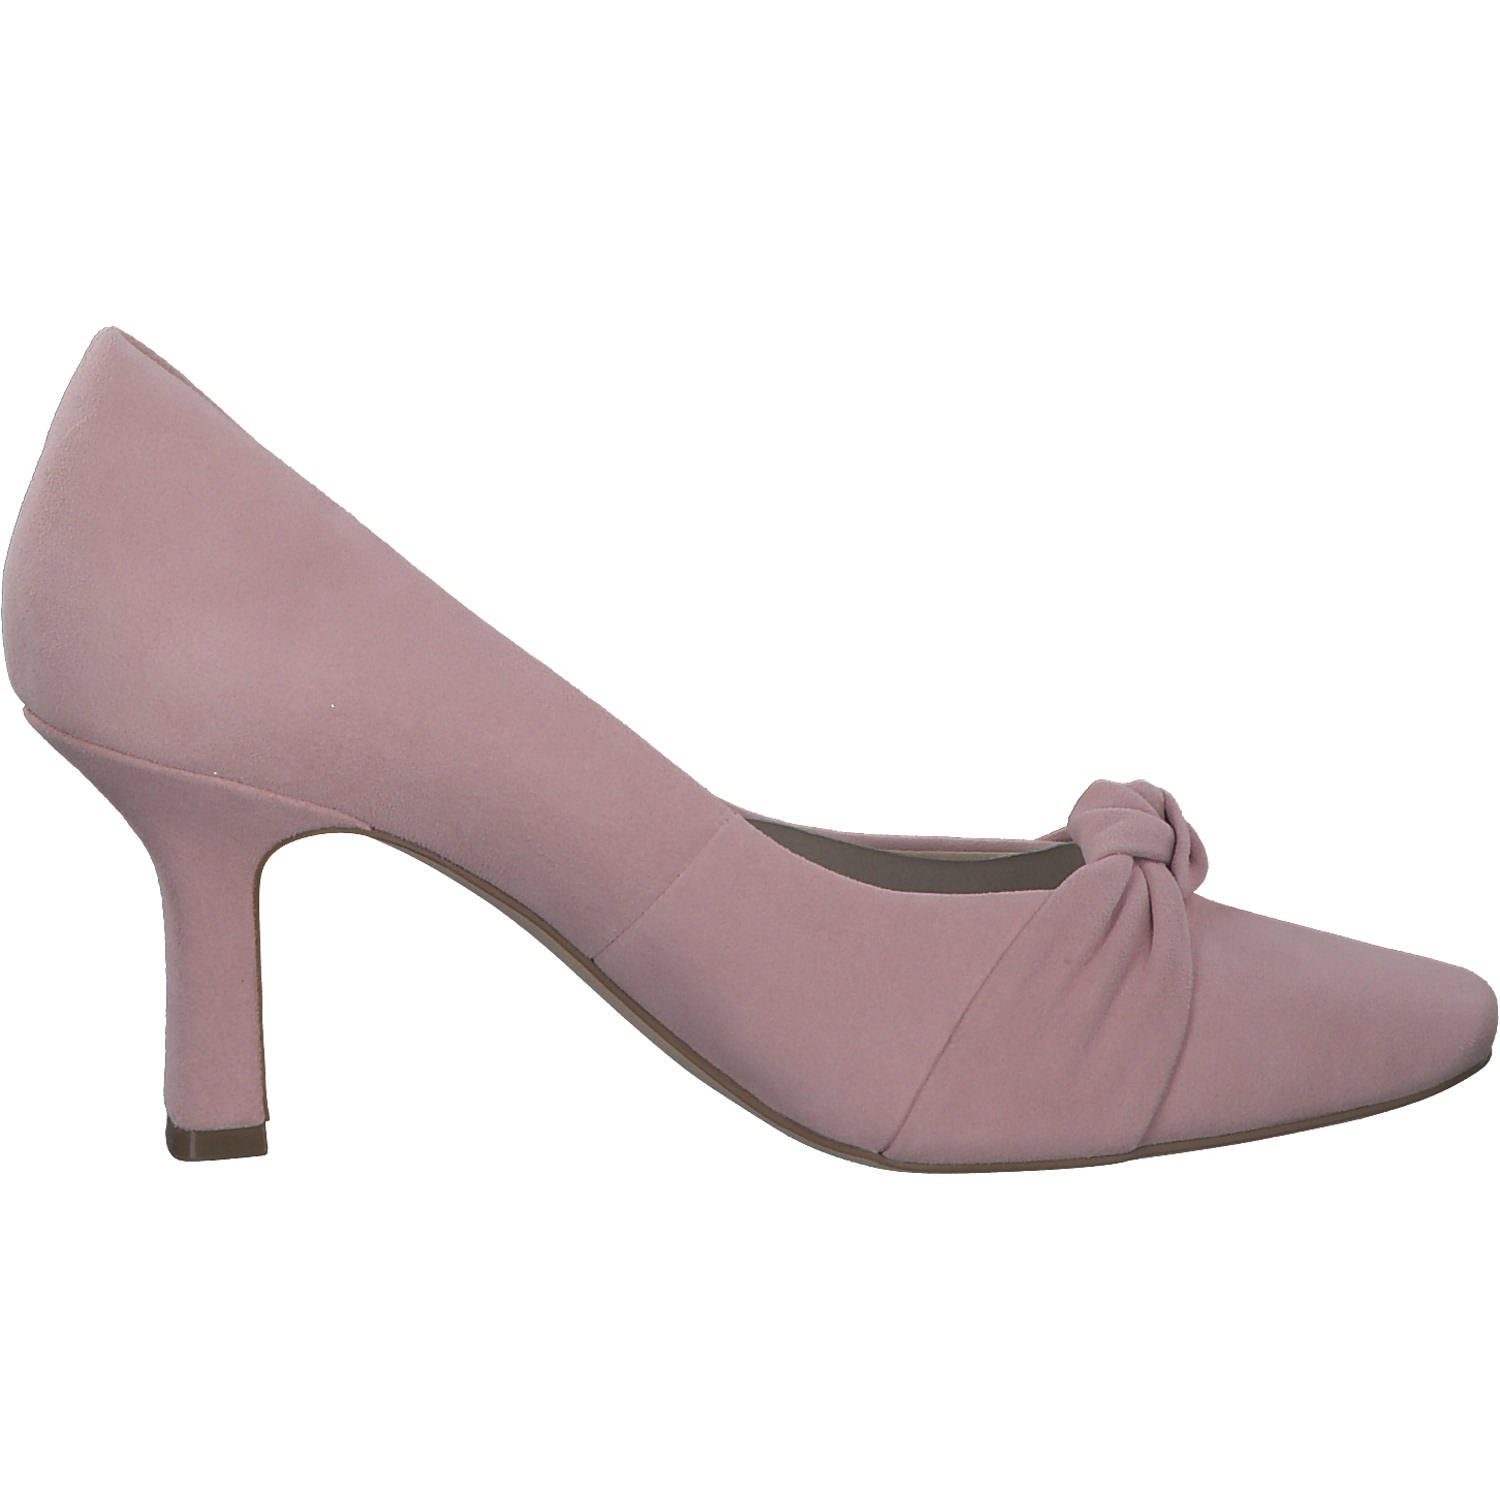 22420 Caprice (03501307) SUEDE CANDY Caprice Pumps